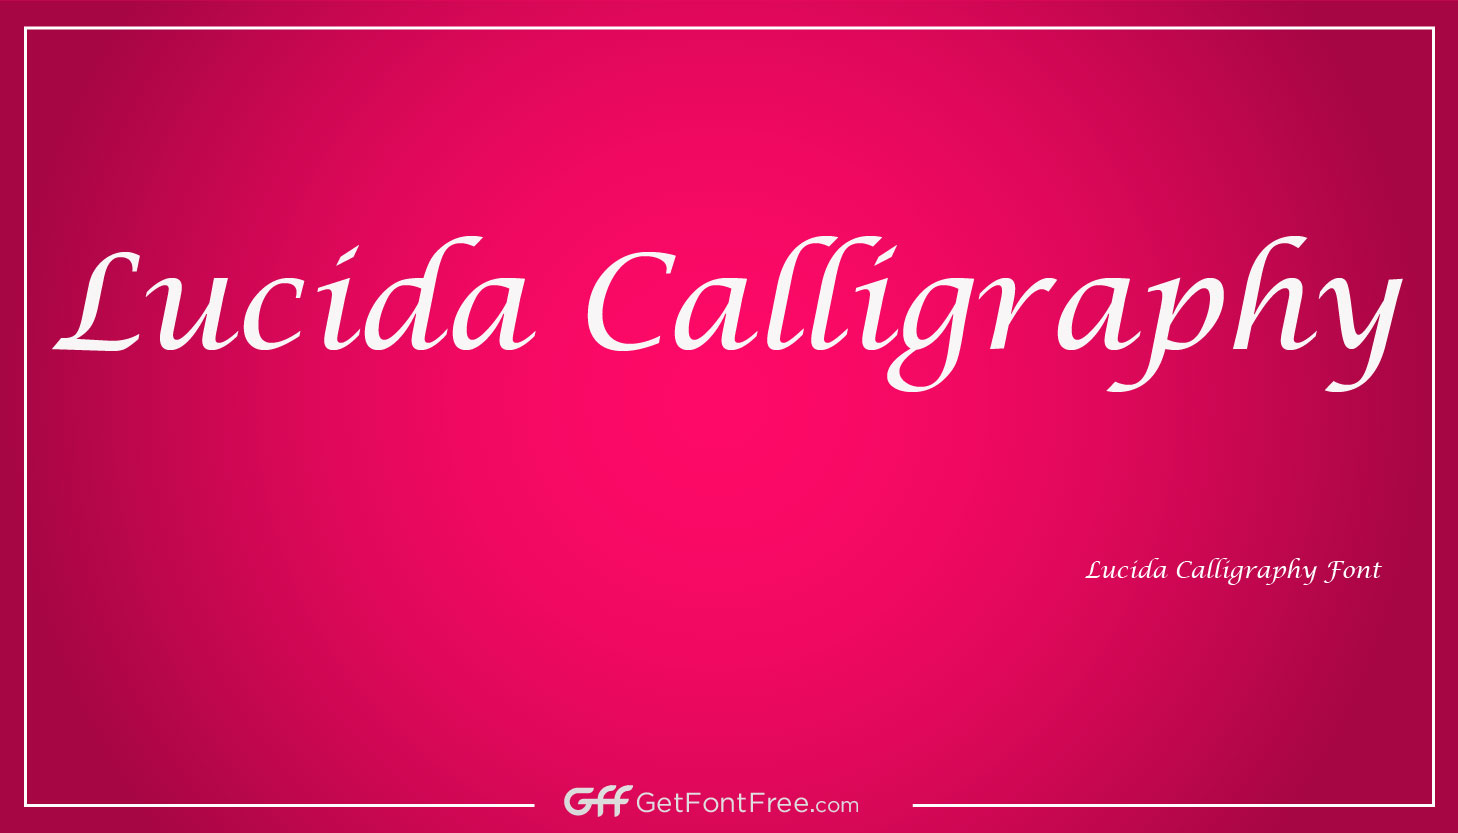 Lucida Calligraphy Font is a script font designed by Charles Bigelow and Kris Holmes in 1993. It is part of the larger Lucida font family, which also includes serif, sans-serif, and monospaced fonts. Lucida Calligraphy is designed to be highly legible and is commonly used for formal and semi-formal documents such as invitations and certificates. The font's design is inspired by traditional calligraphic forms and features a flowing, cursive style with elegant, curved letterforms.